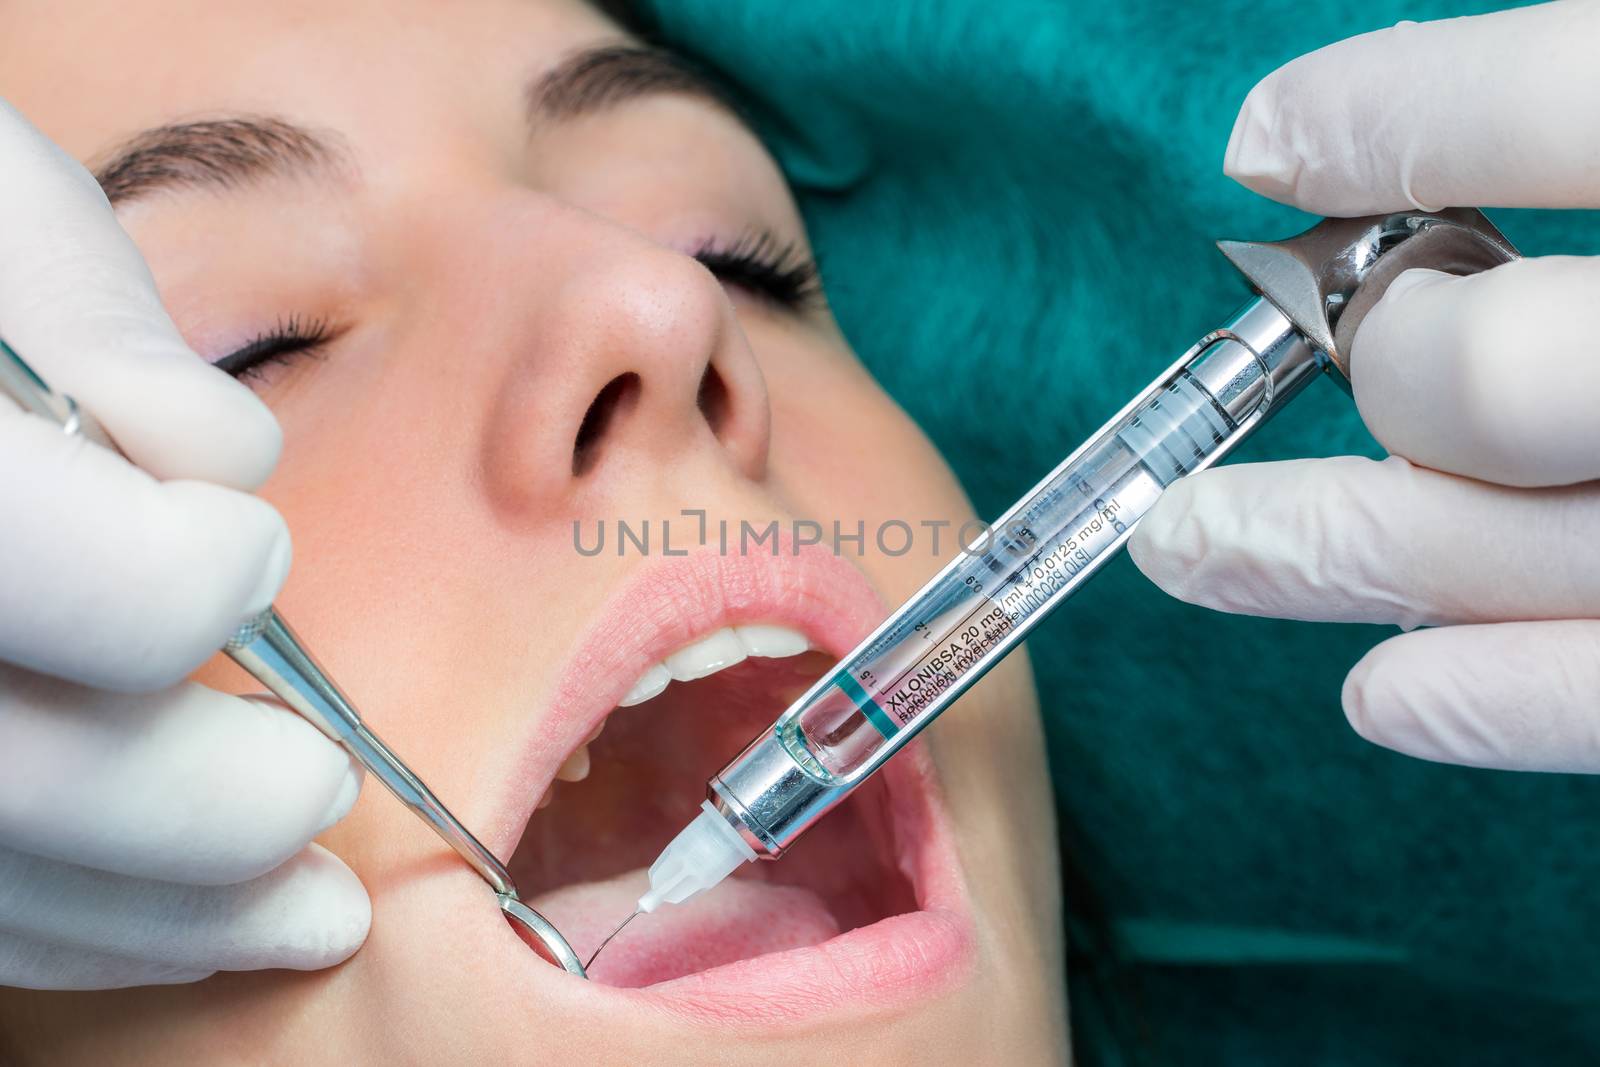 Girl receiving anesthesia with medical syringe. by karelnoppe